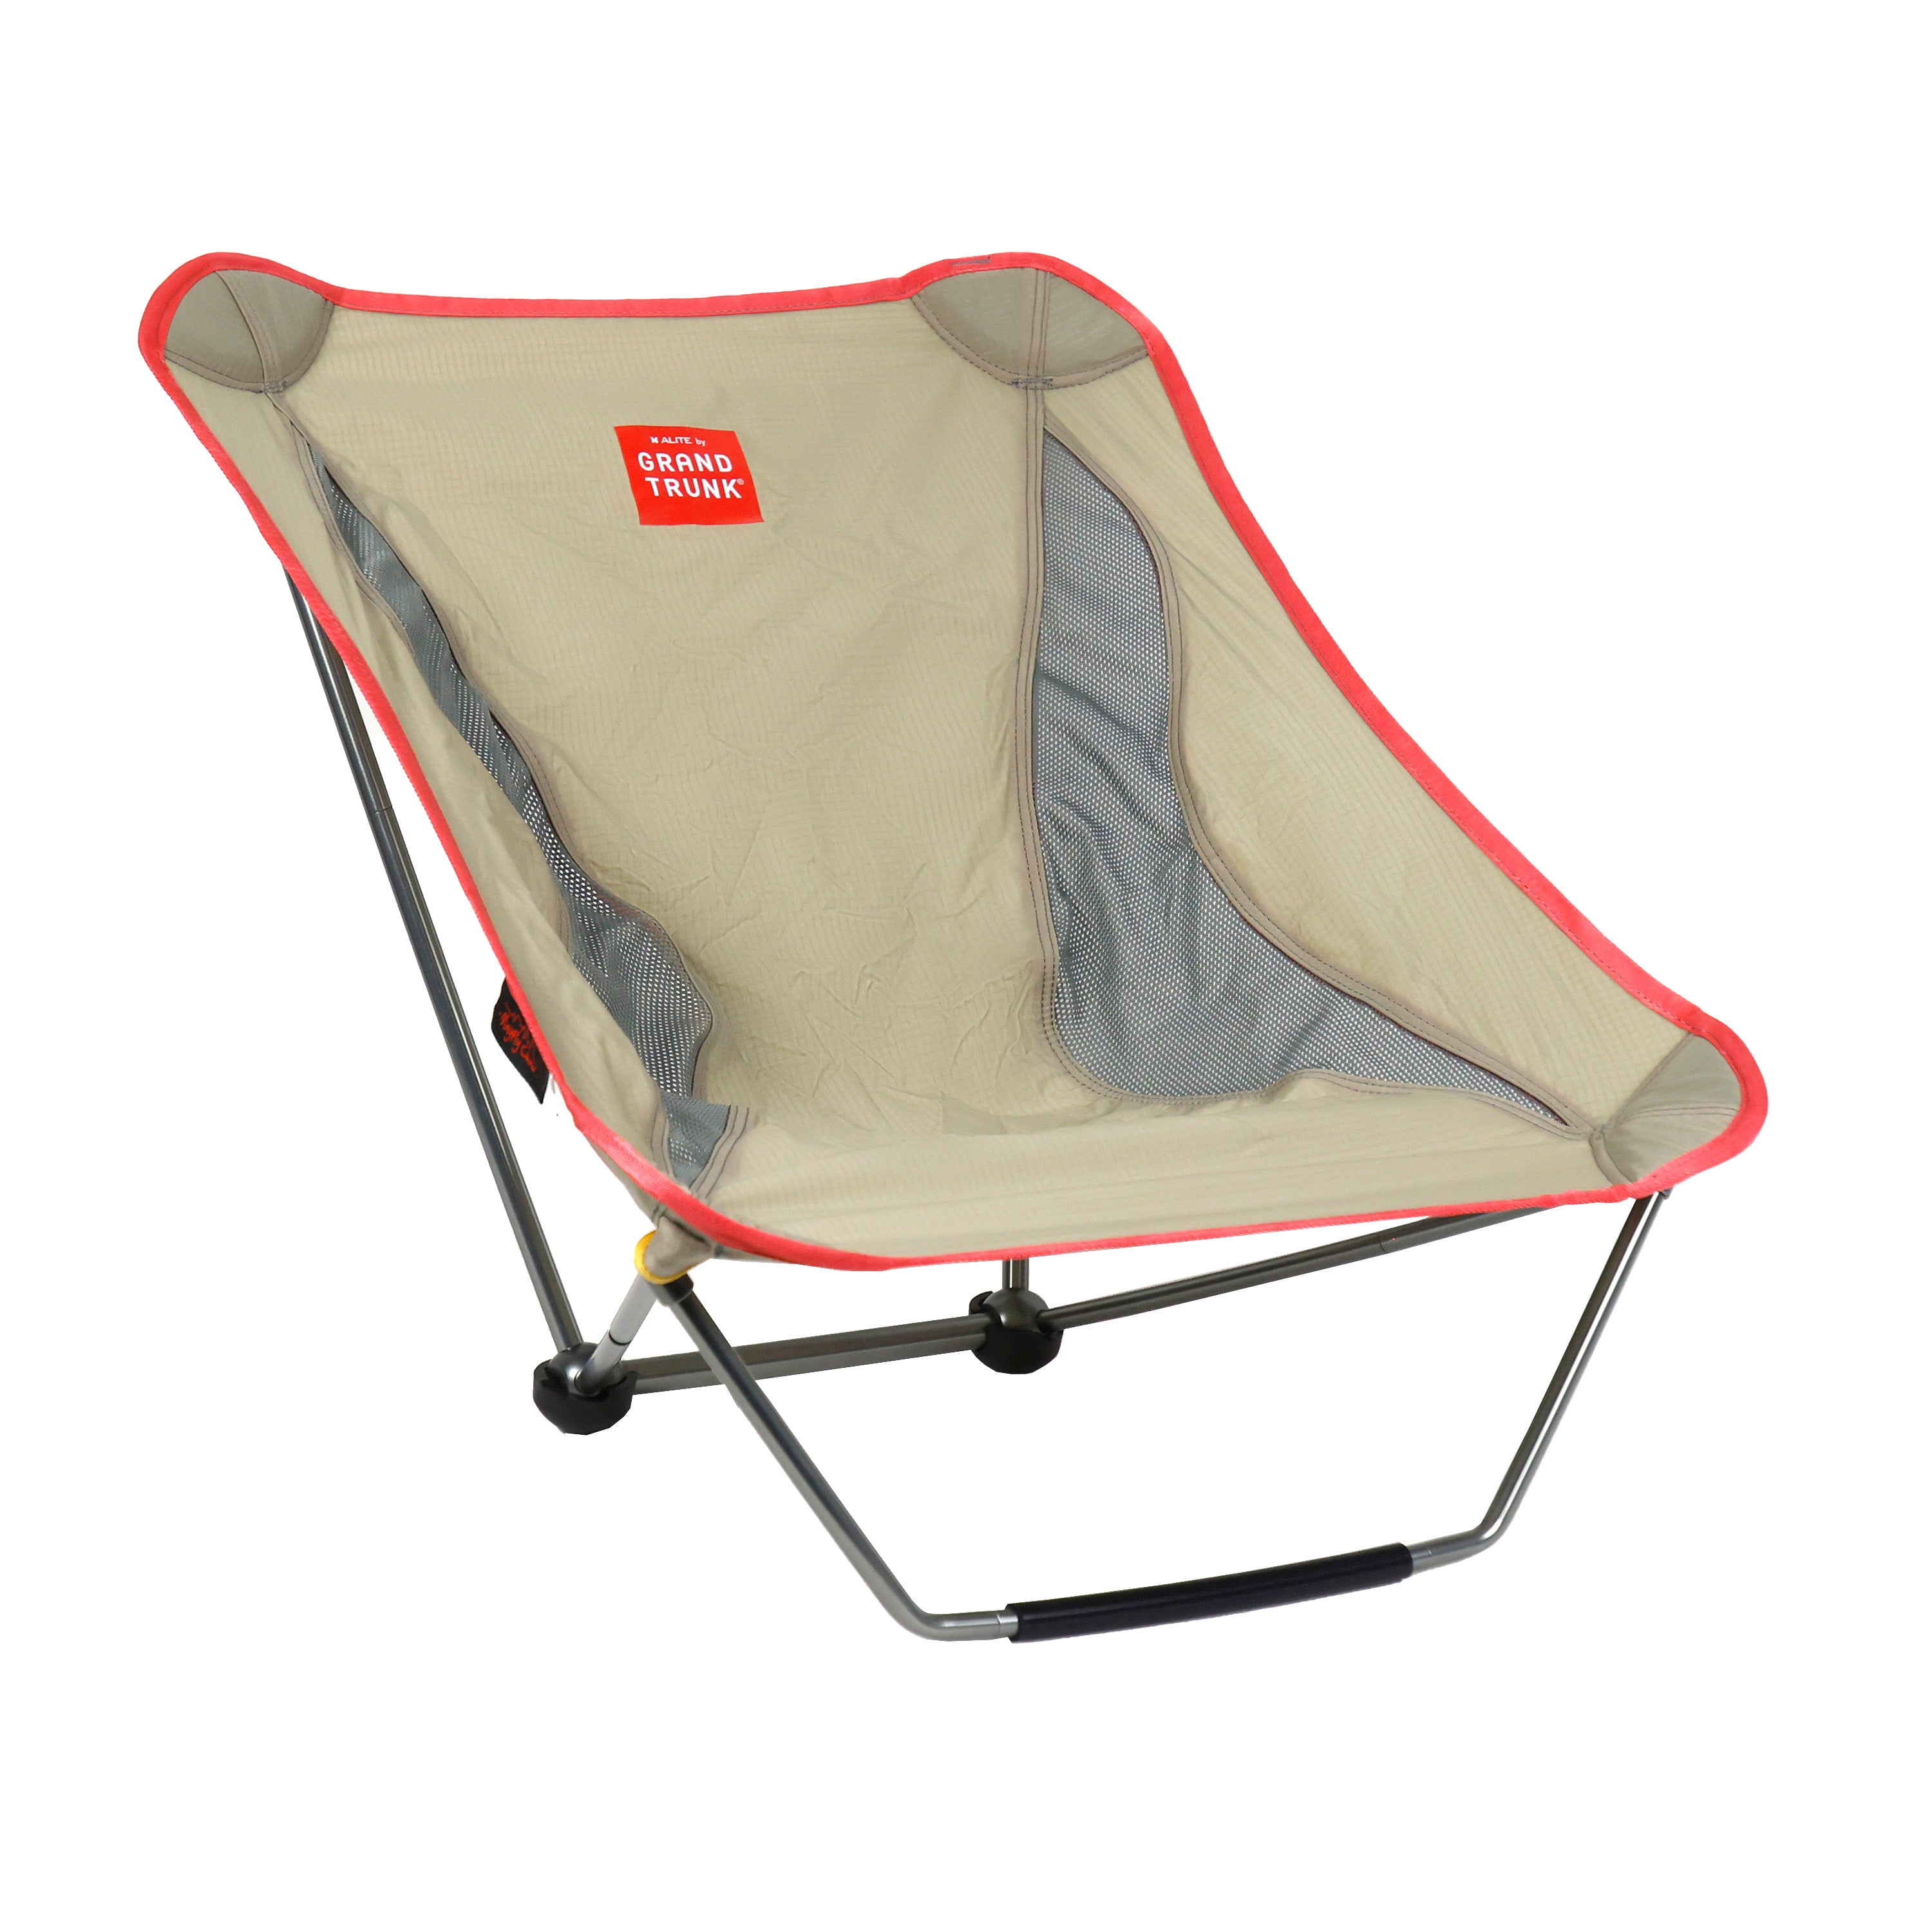 Alite Mantis Chair | Lightweight Stable Camping Chair | Portable, Quick And  Easy Setup | Lawn Chair For Hiking, Backpacking, Fishing And Beach 